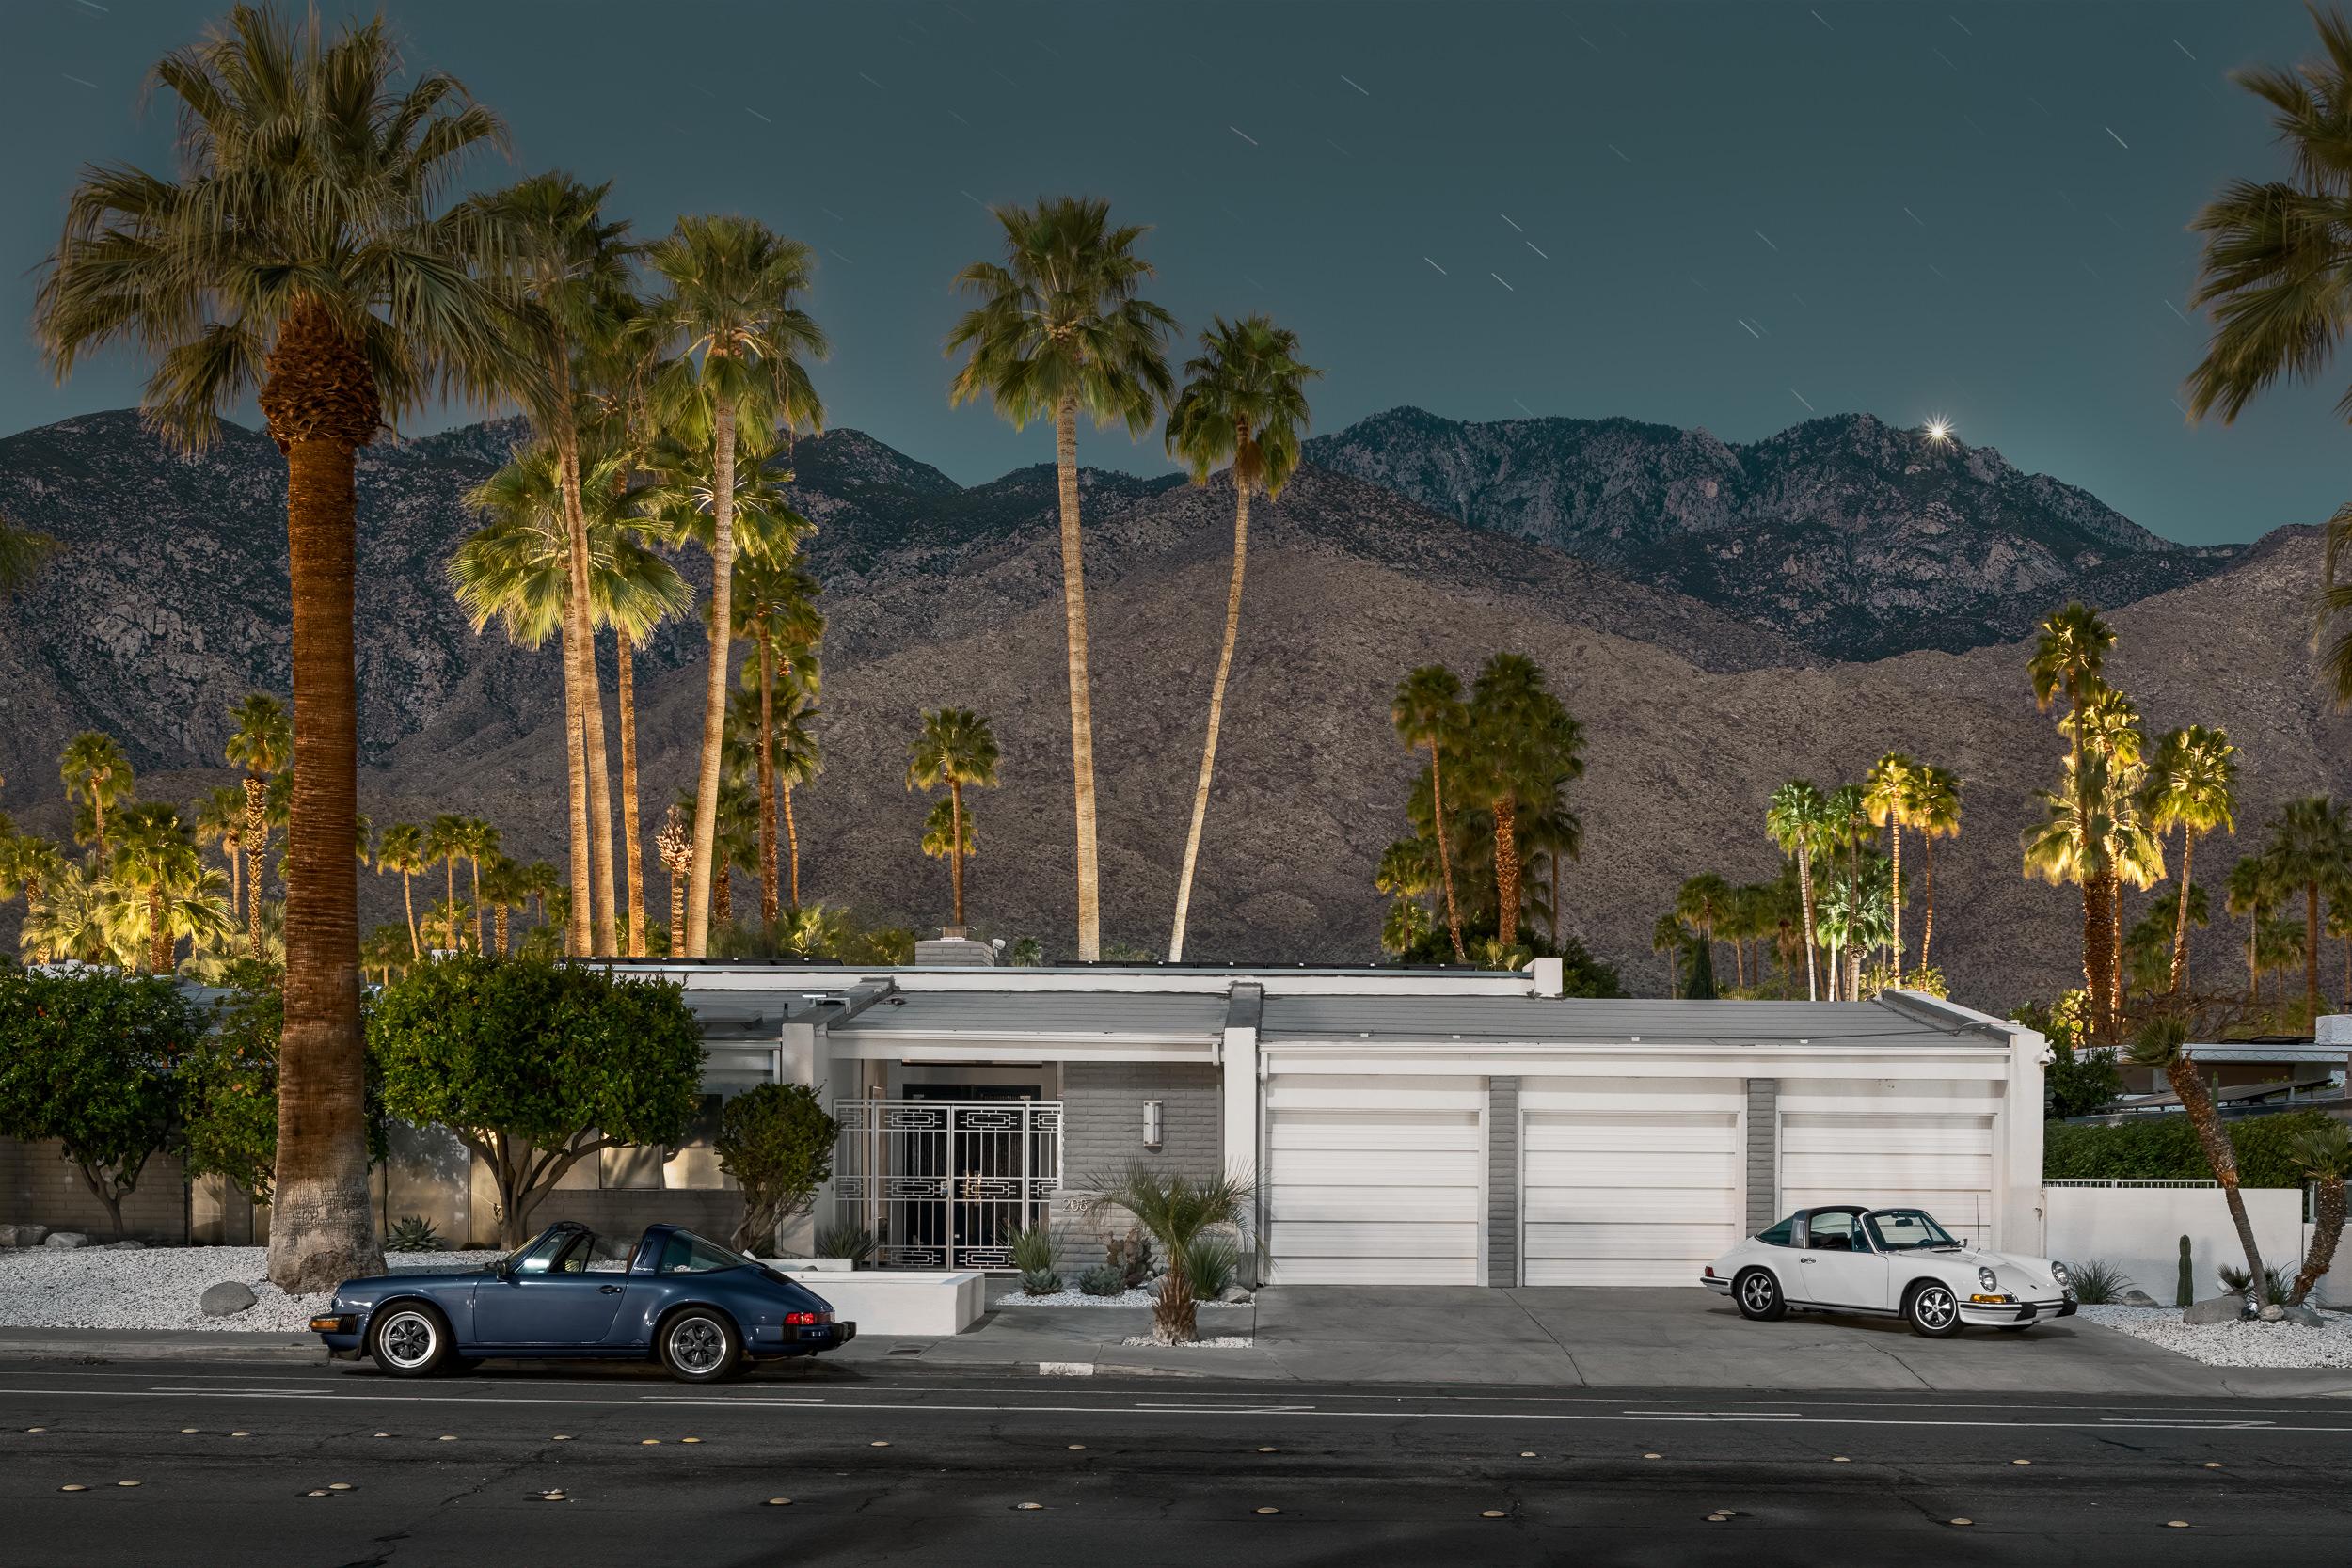 Limited Edition series of Classic a couple Porsche Targa within Palm Springs California. Mid Century Modern Design Architecture. Photography by Tom Blachford.

What began for Tom Blachford as a fateful discovery one night has developed into an